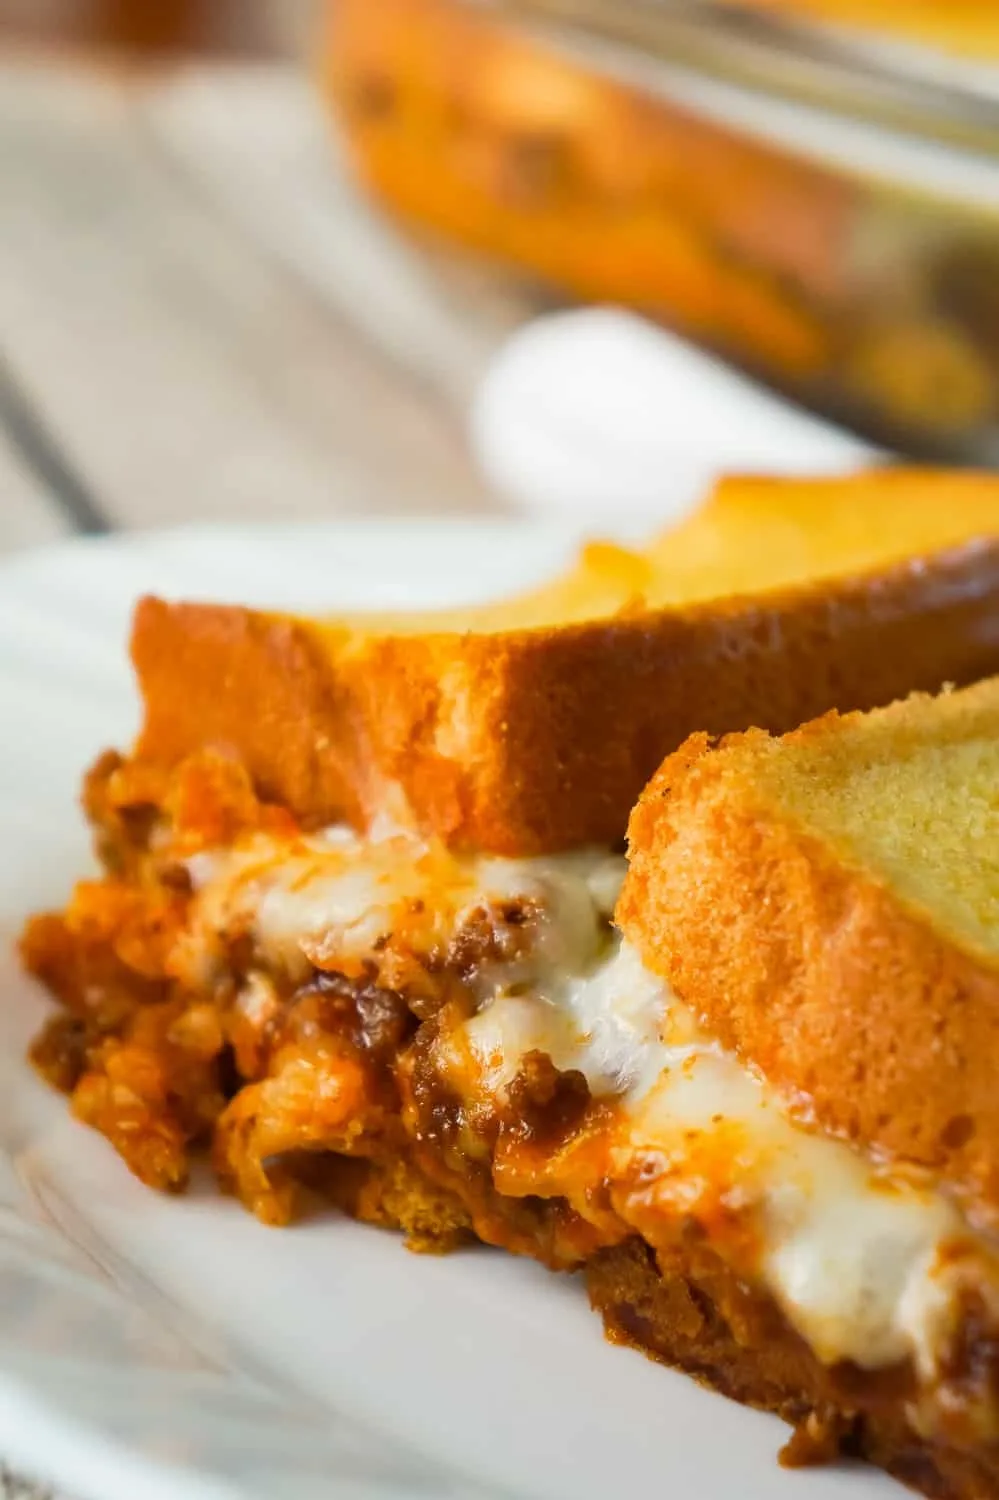 Sloppy Joe Grilled Cheese Casserole is an easy ground beef dinner recipe your whole family will love. This tasty casserole is loaded with mozzarella cheese and sloppy joe filling sandwiched between two layers of bread.